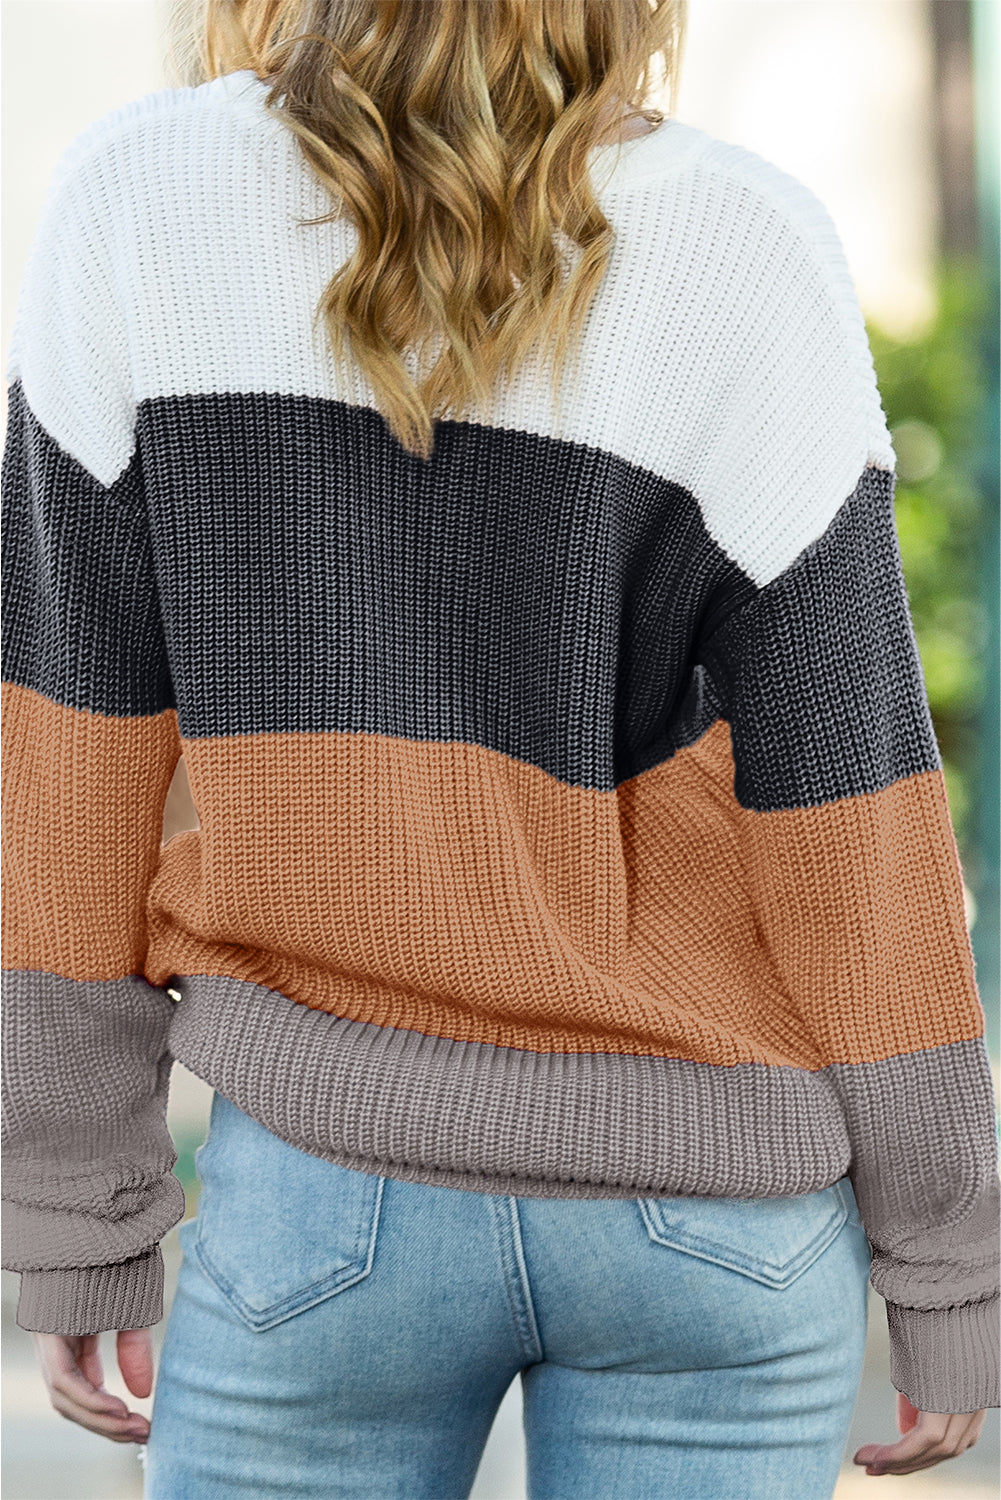 Chestnut Color Block Casual Knit Pullover Sweater